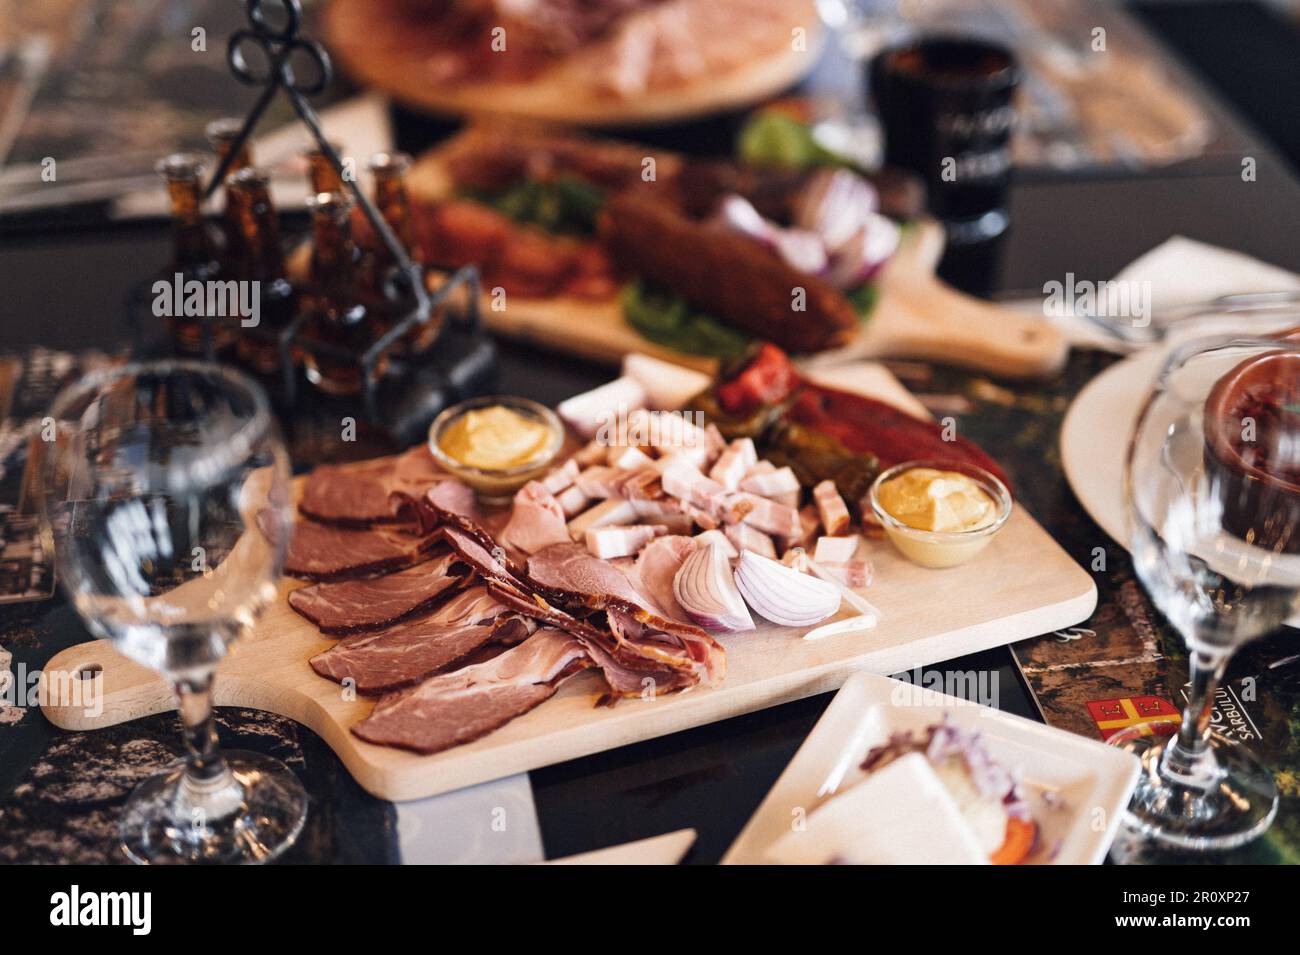 A wooden cutting board with a variety of cured meats. Stock Photo